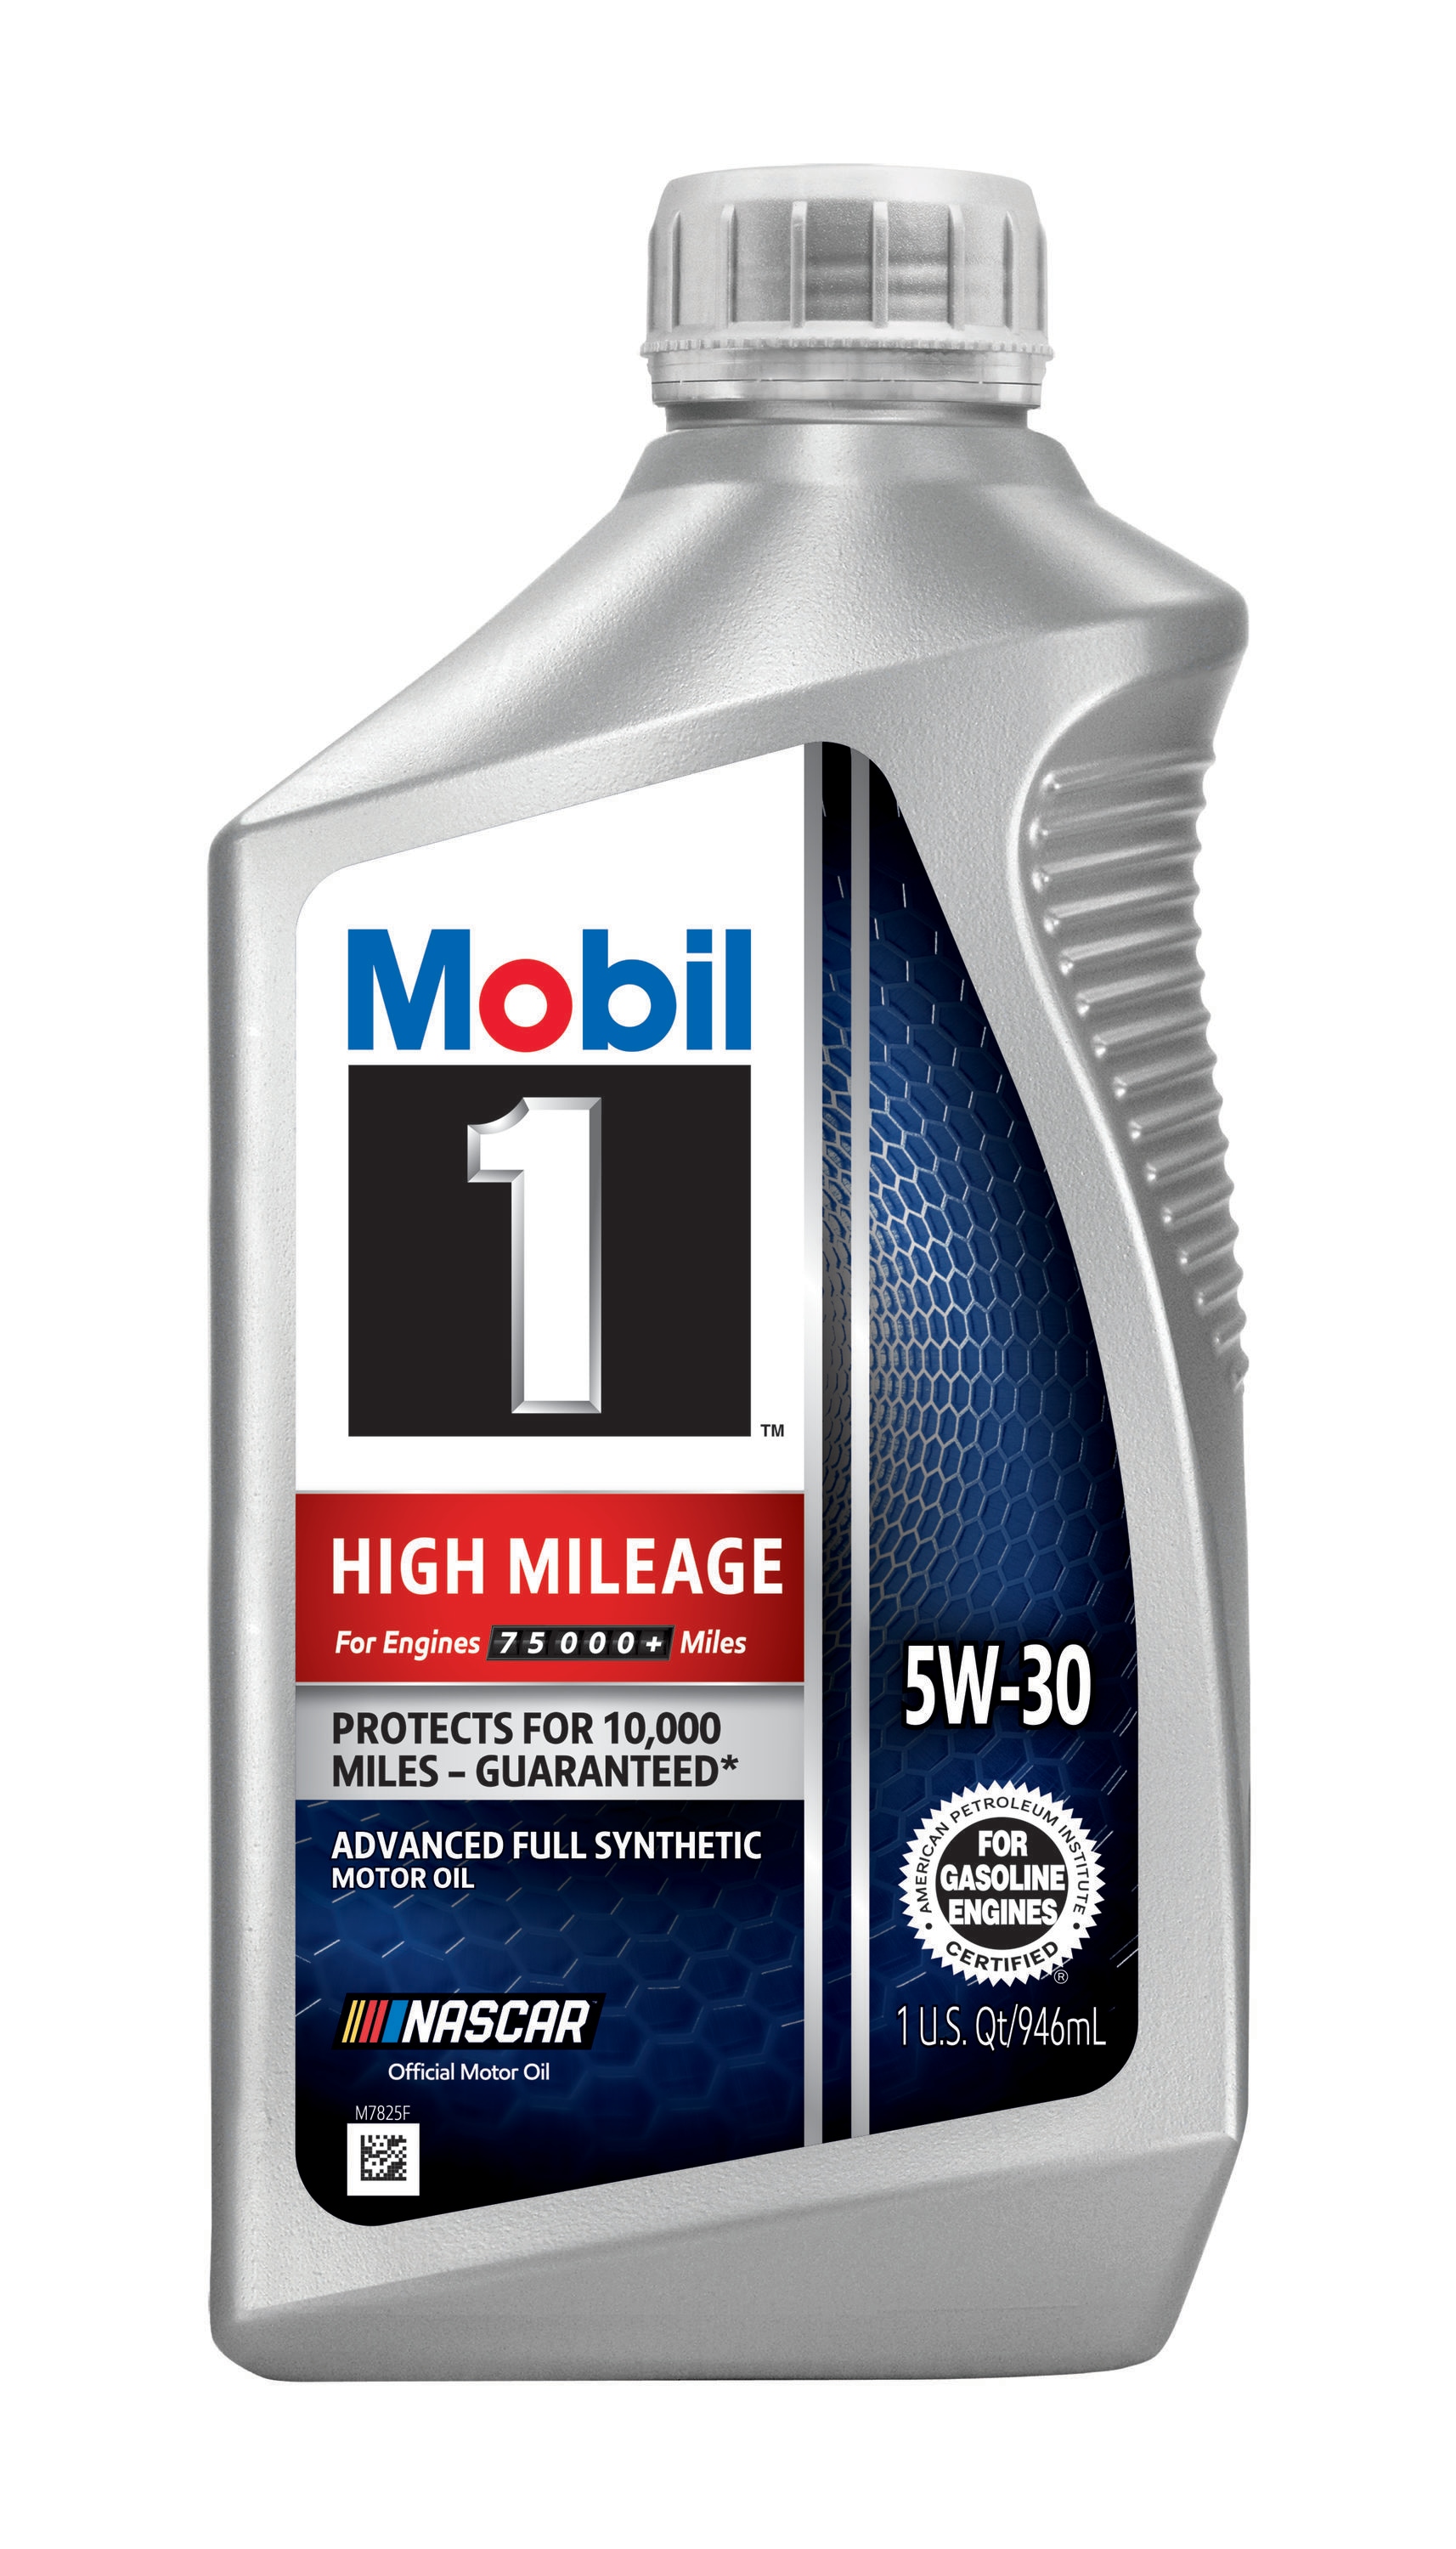 Mobil 1 High Mileage Synthetic 5W-30 Motor Oil - 1 Quart - Full